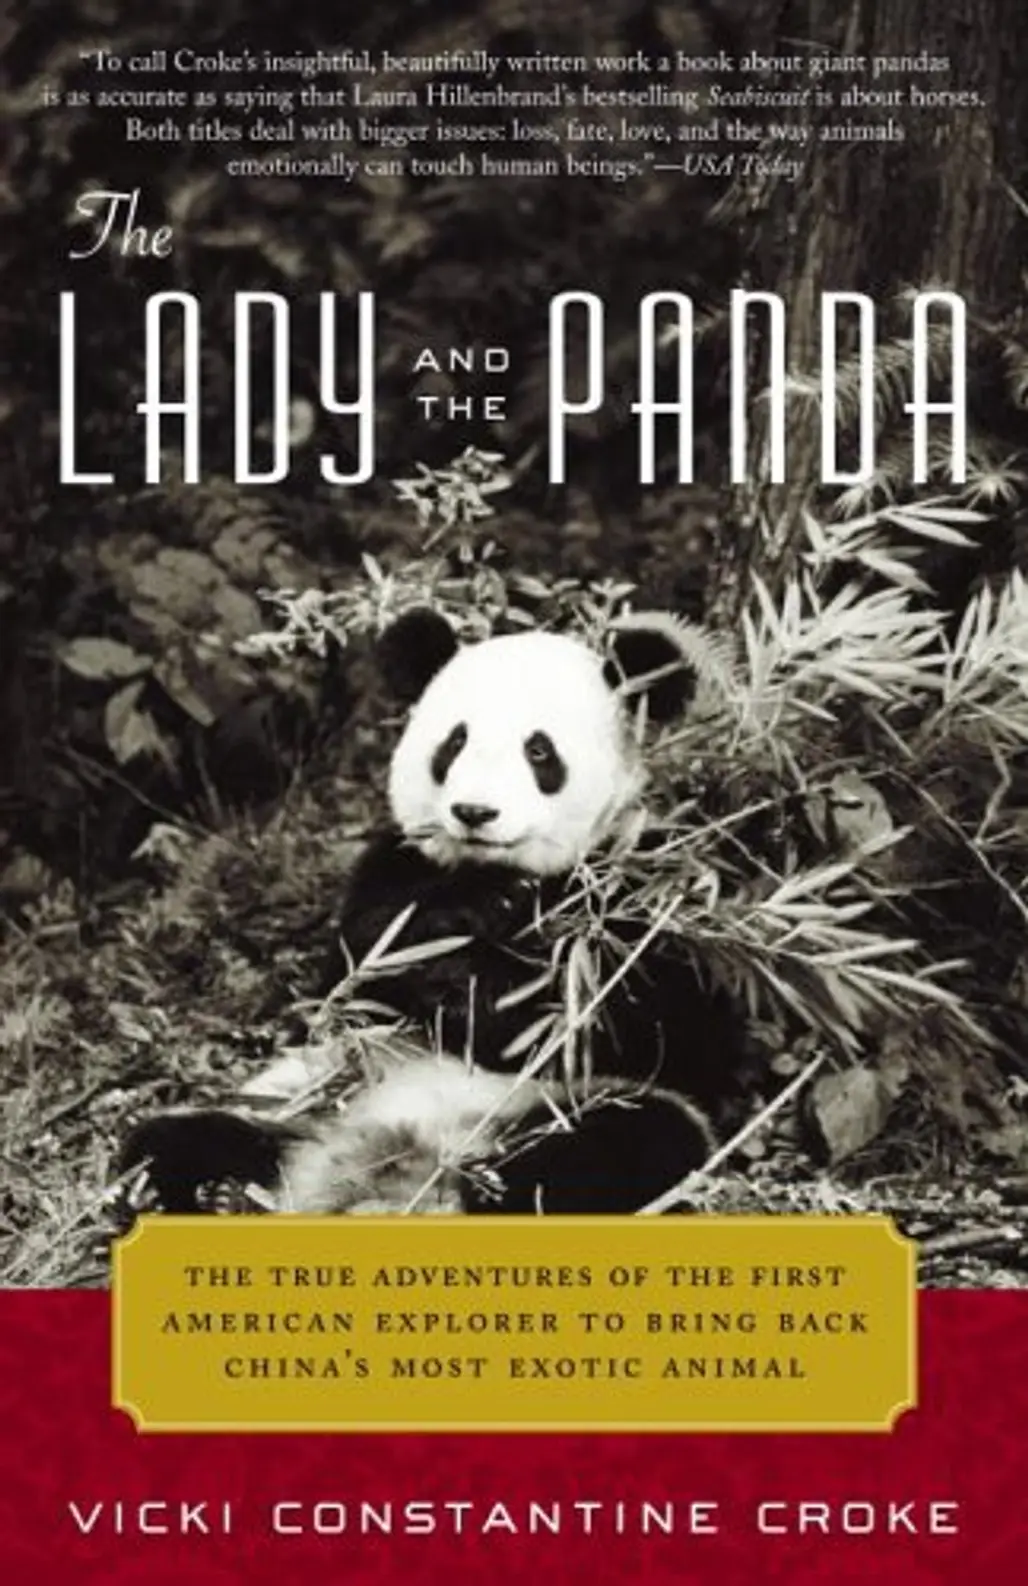 “the Lady and the Panda” by Vicki Constantine Croke